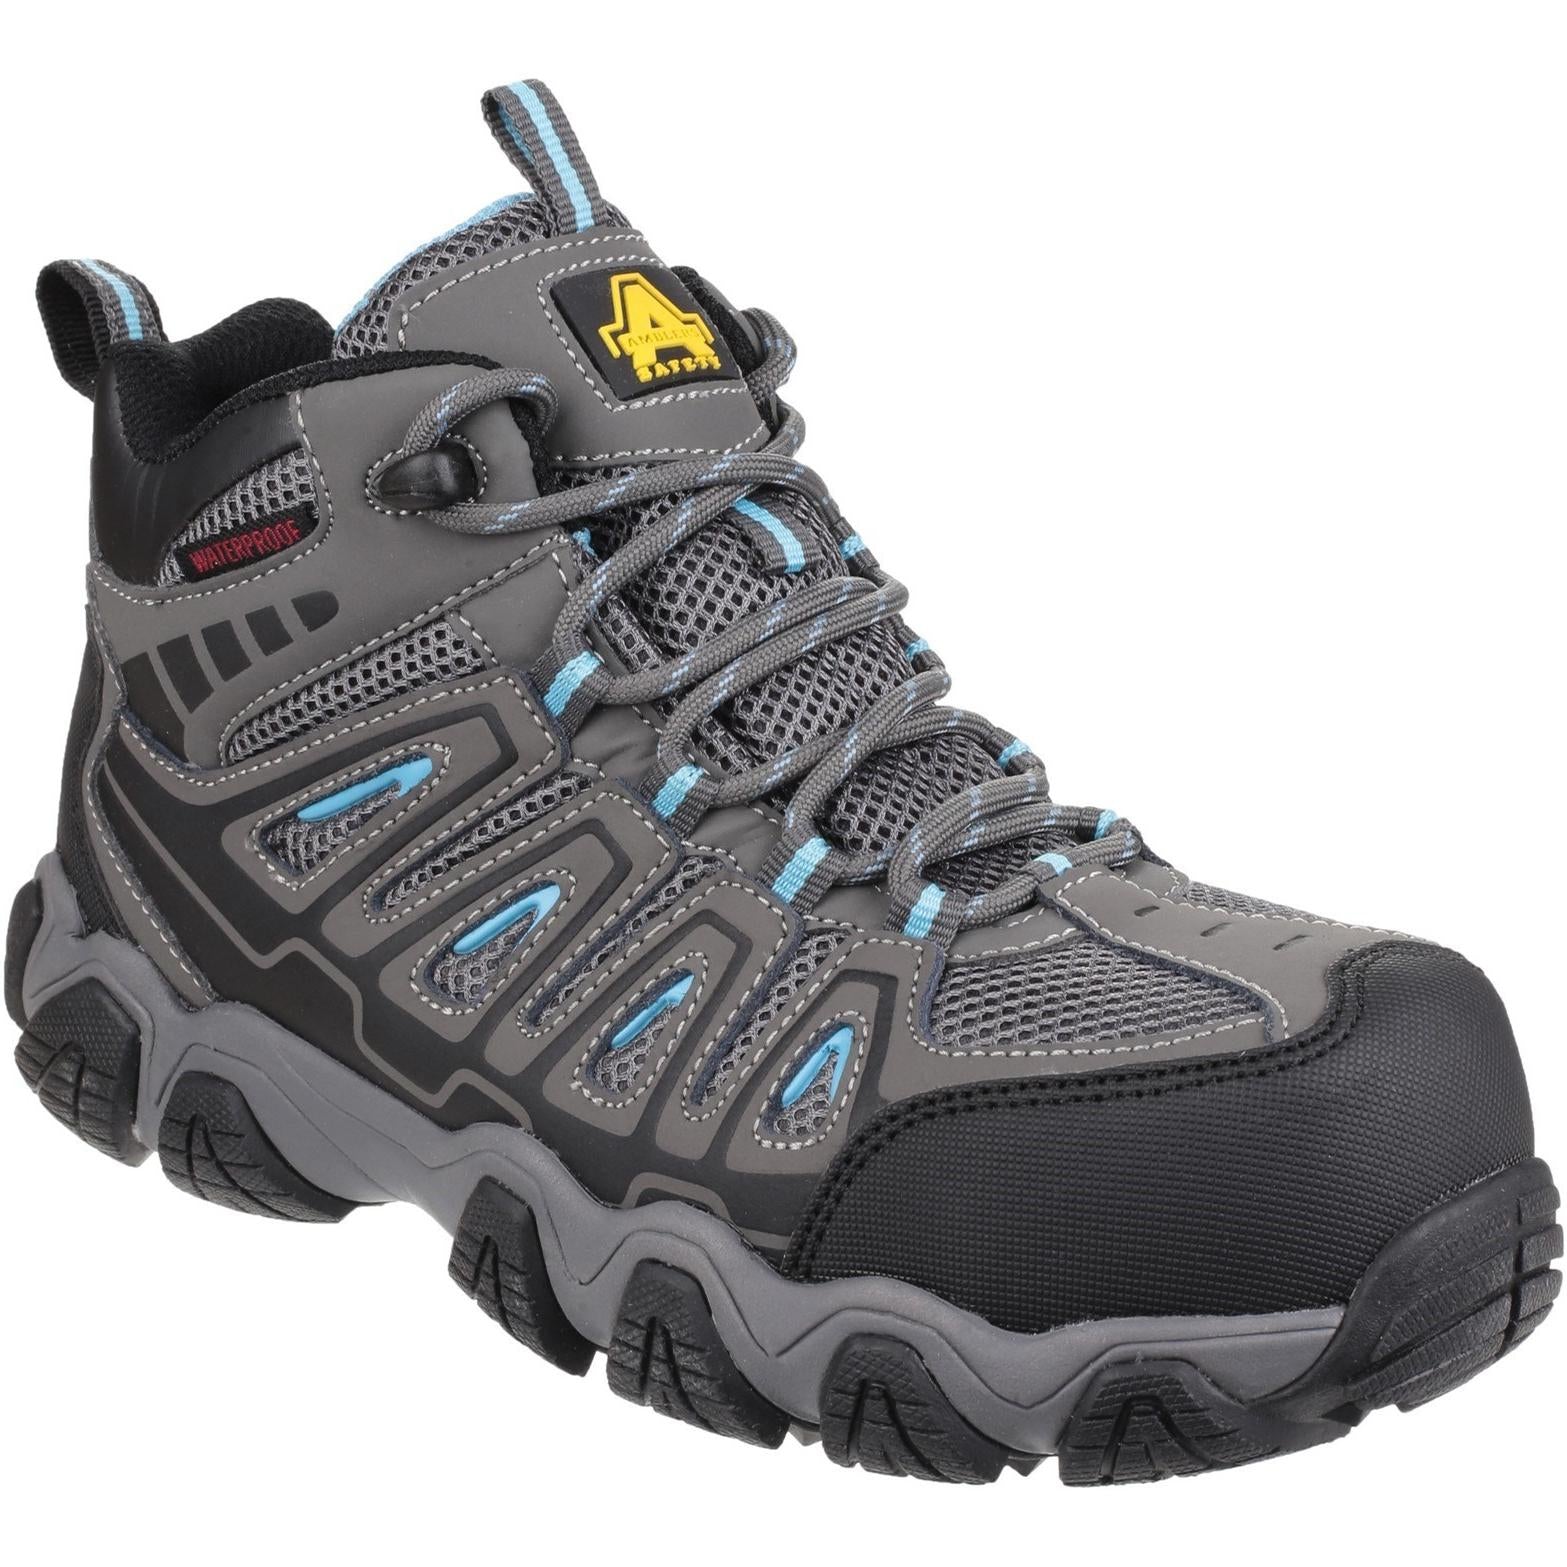 Amblers Safety AS802 Waterproof Non-Metal Ladies Safety Hiker Boots